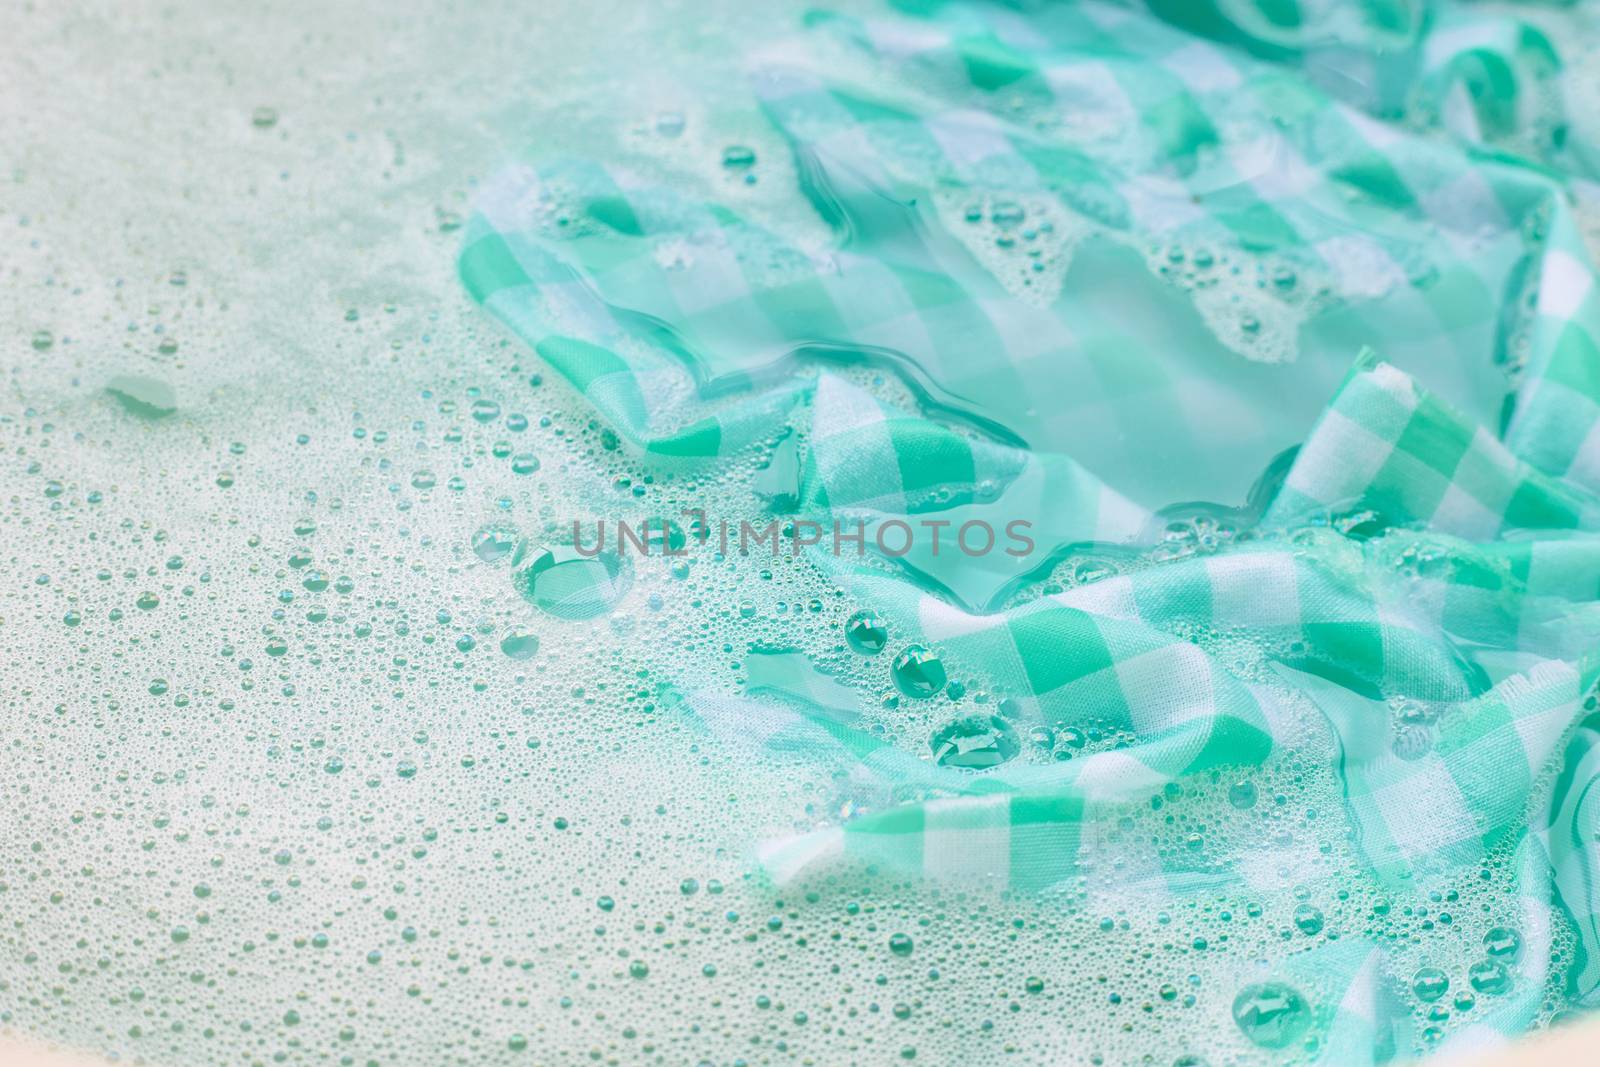 Soak a green white tablecloth before washing.